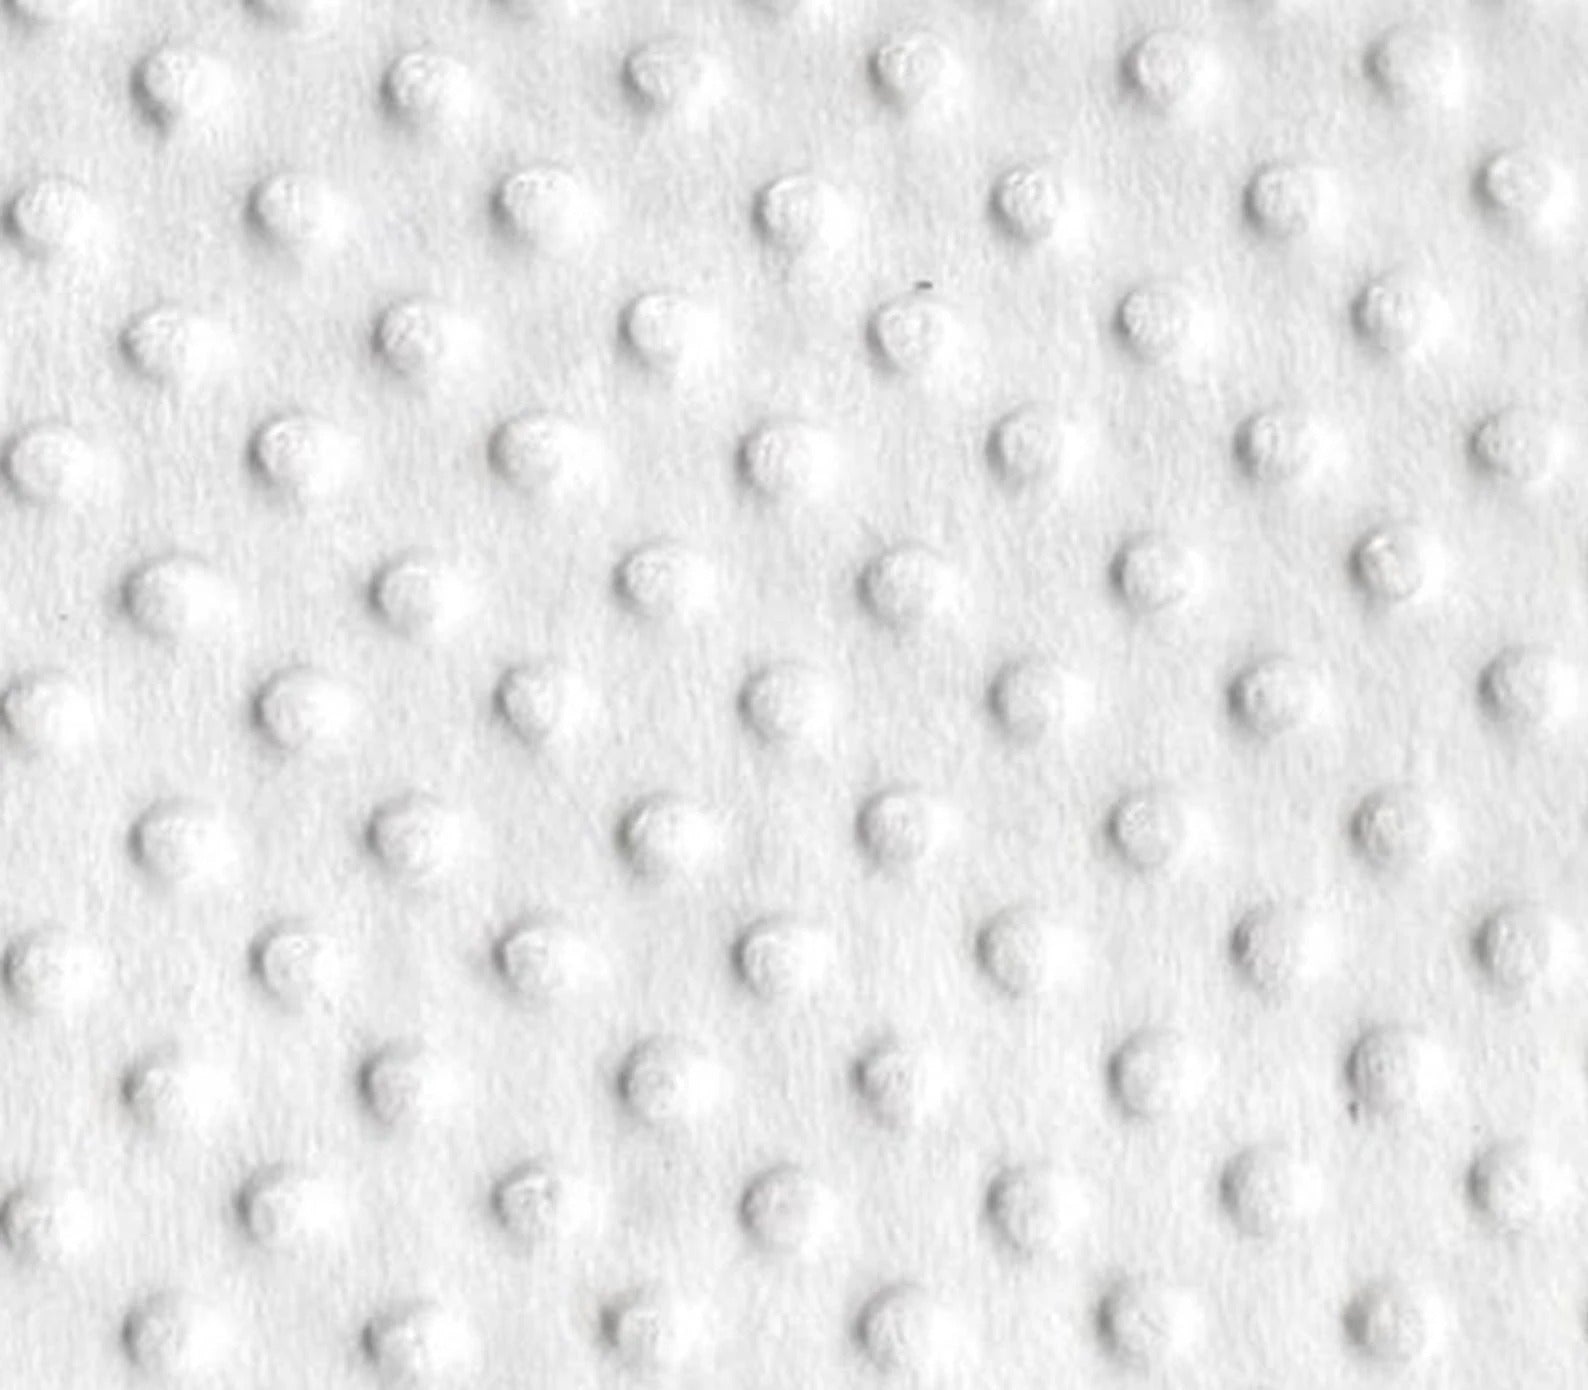 Dimple Dot Minky Fabric Sold By The Yard - 36"/ 58" White